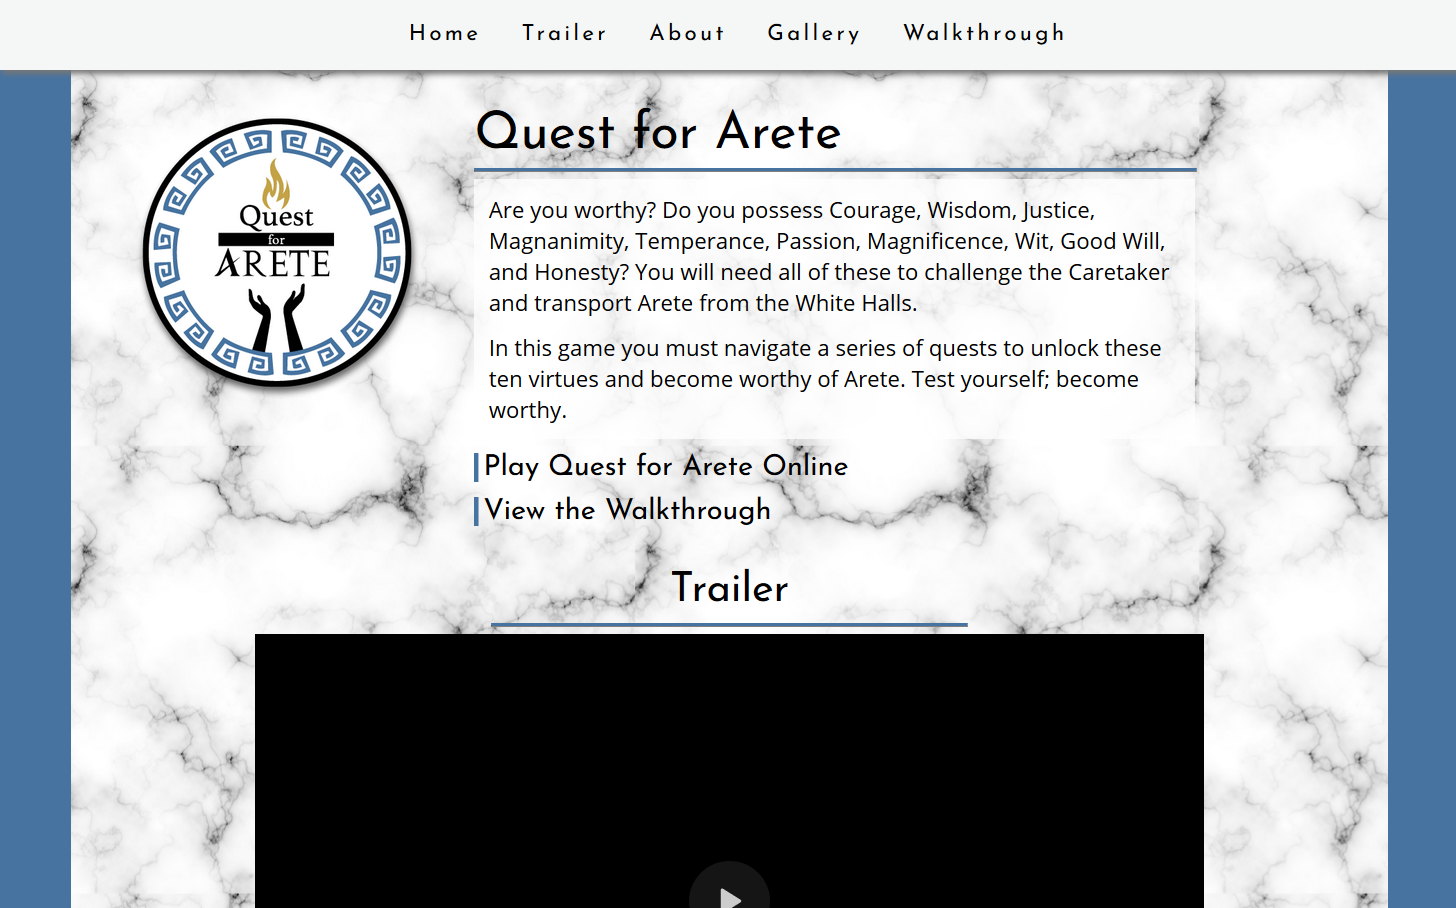 screenshot of the Quest for Arete website landing page as of 4/2/21